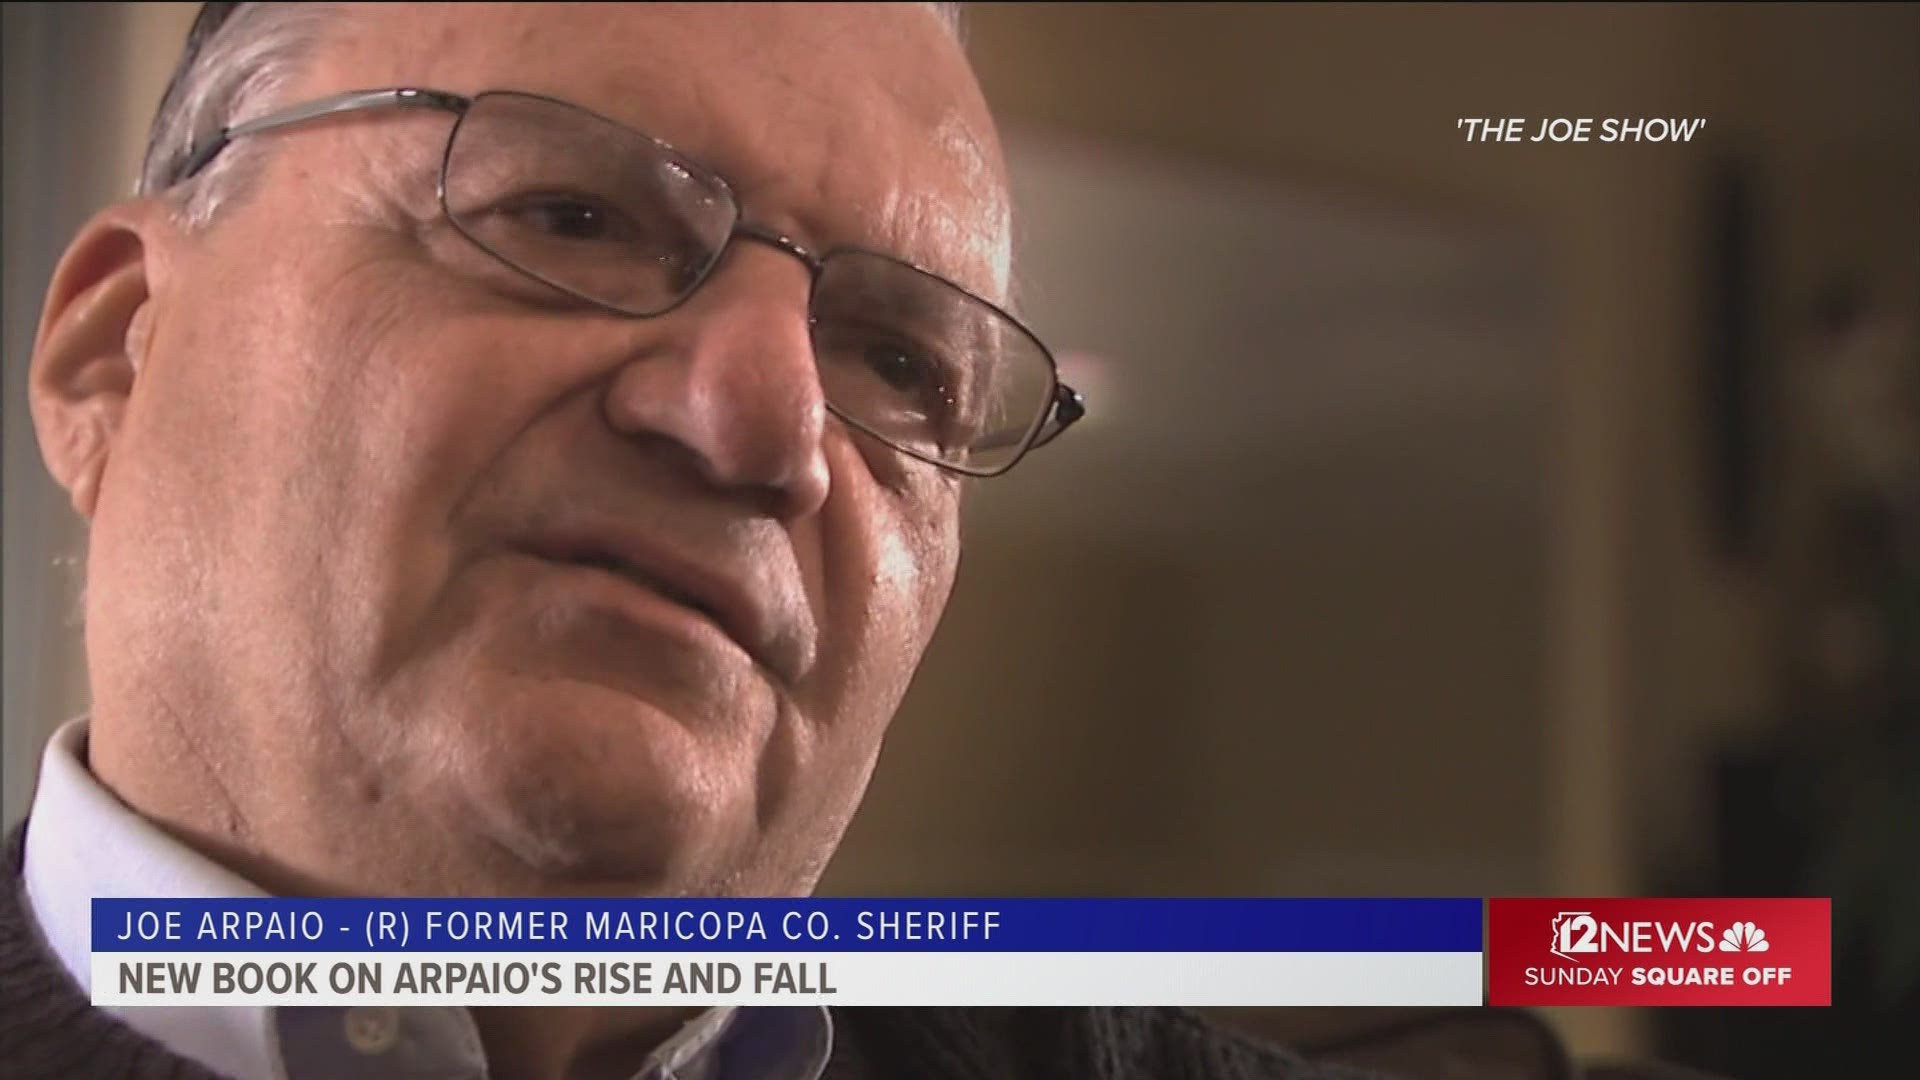 A new book tells the story of former Sheriff Joe Arpaio, interwoven with the history of immigration restrictionism in Arizona.